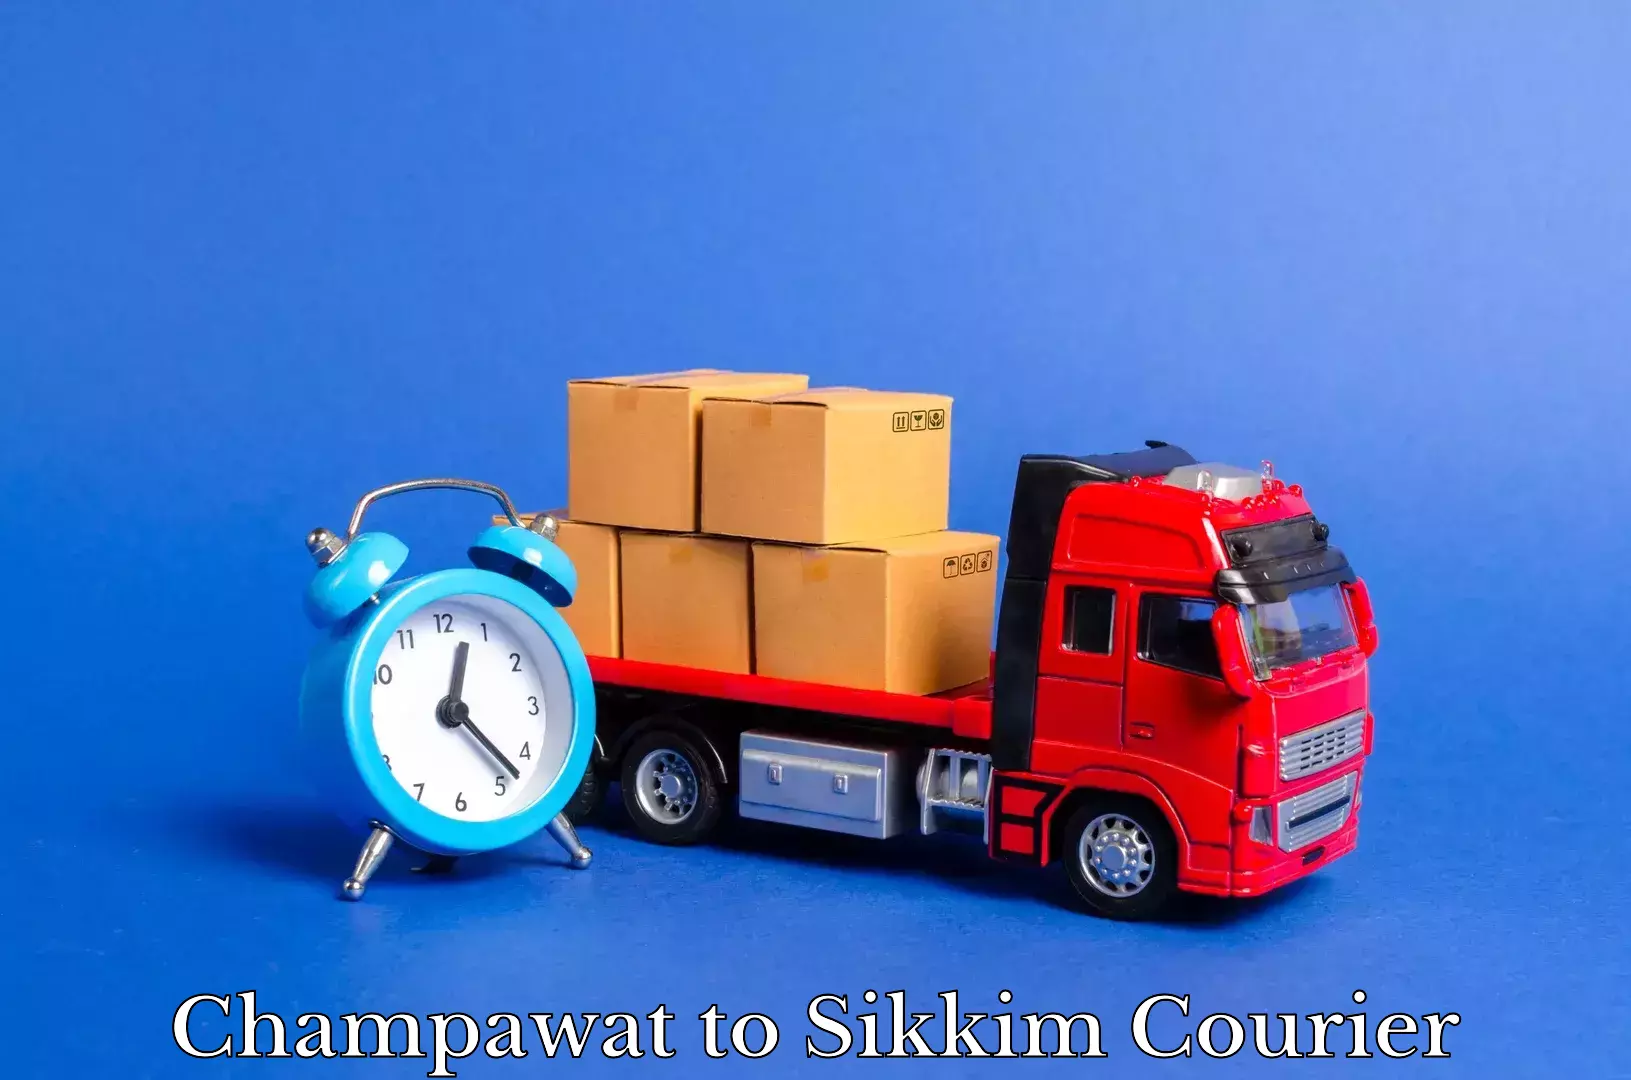 Furniture transport experts Champawat to East Sikkim